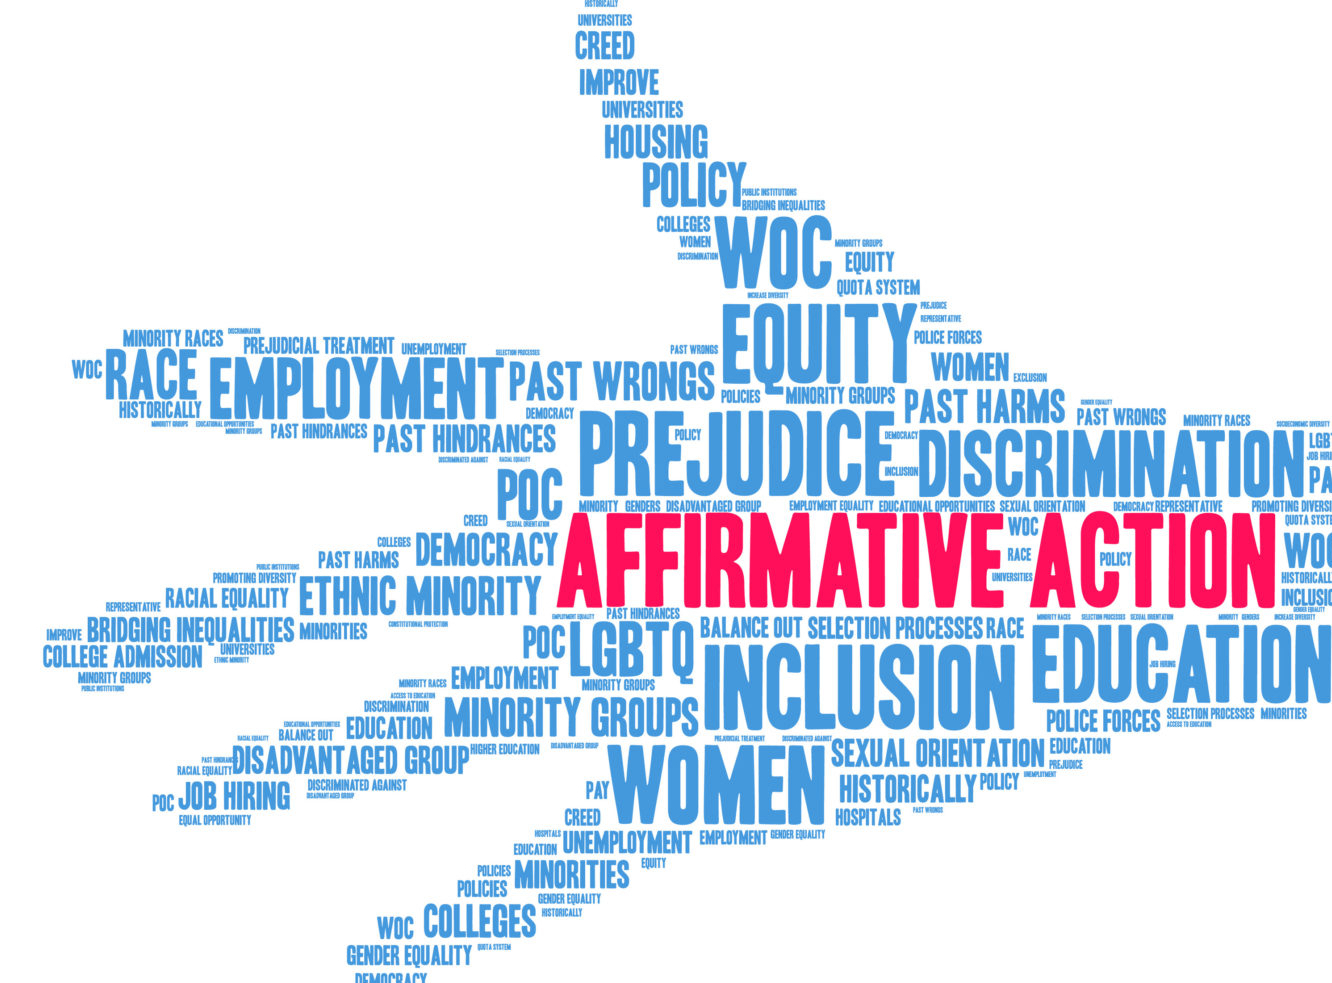 Affirmative Action Plans—A Potentially Important Safeguard for Race